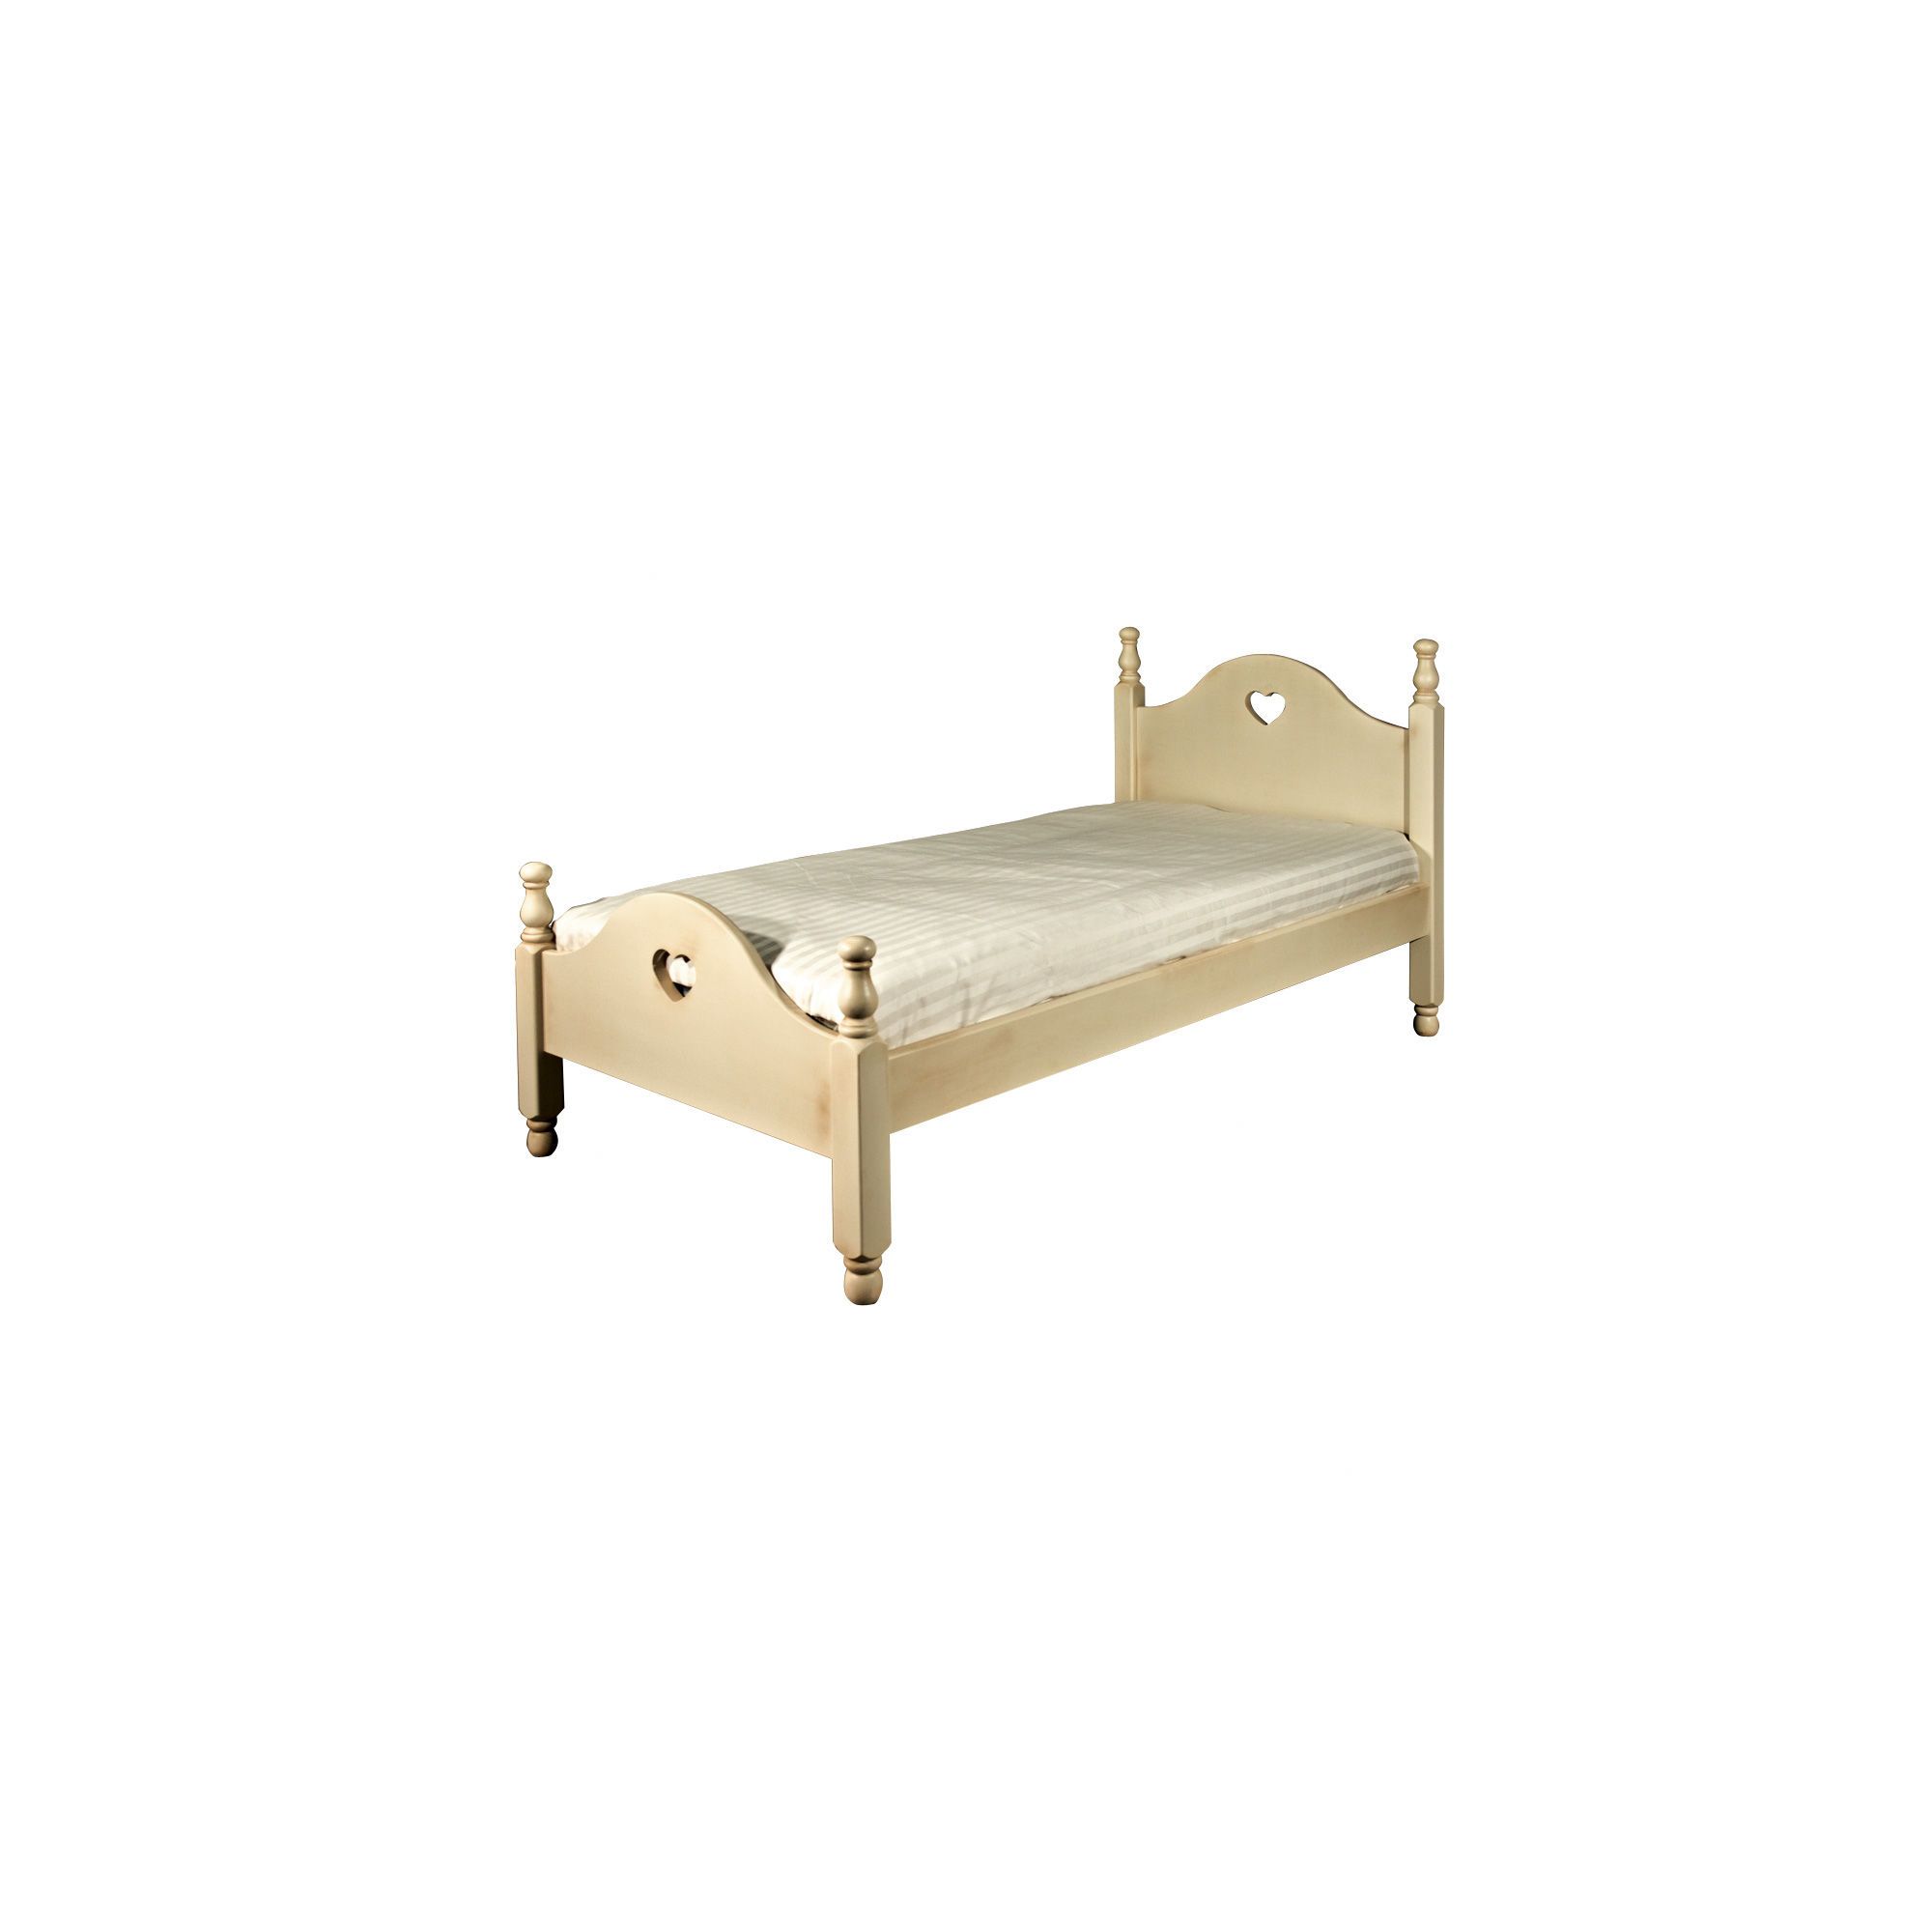 Alterton Furniture Danielle Single Bed Frame - Unfinished at Tescos Direct